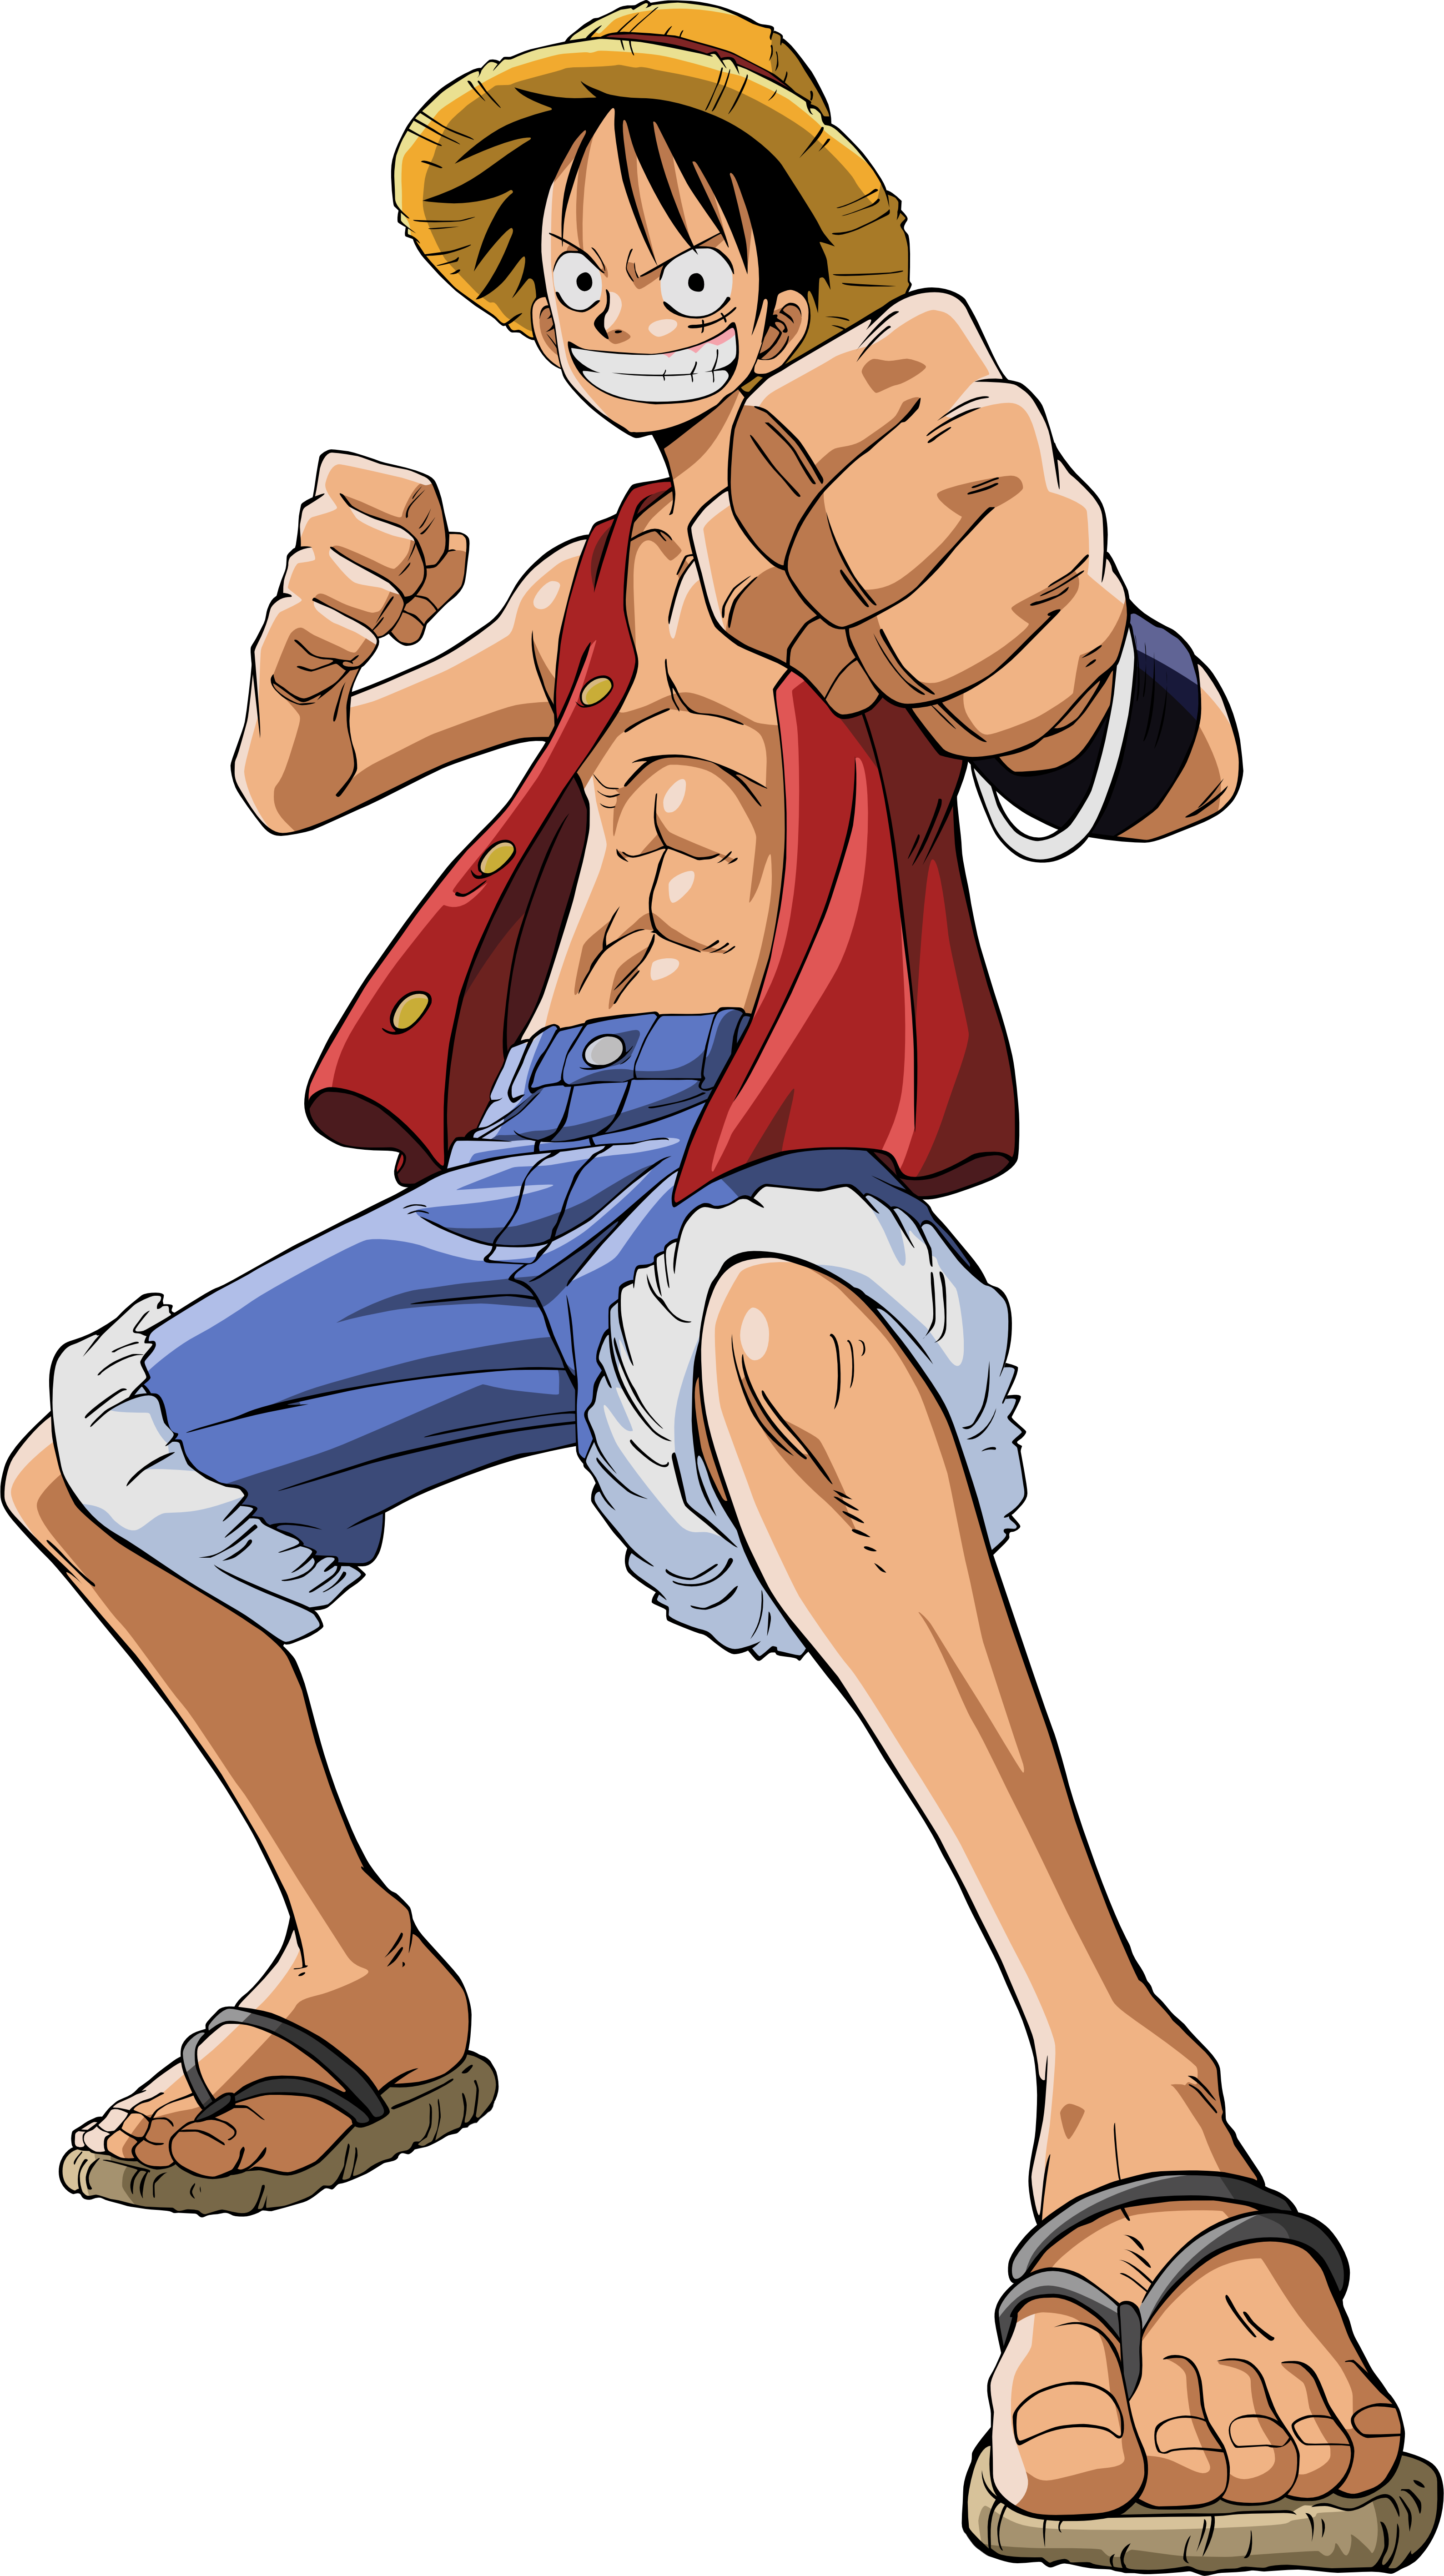 Download One Piece Luffy Transparent Background HQ PNG Image FreePNGImg.